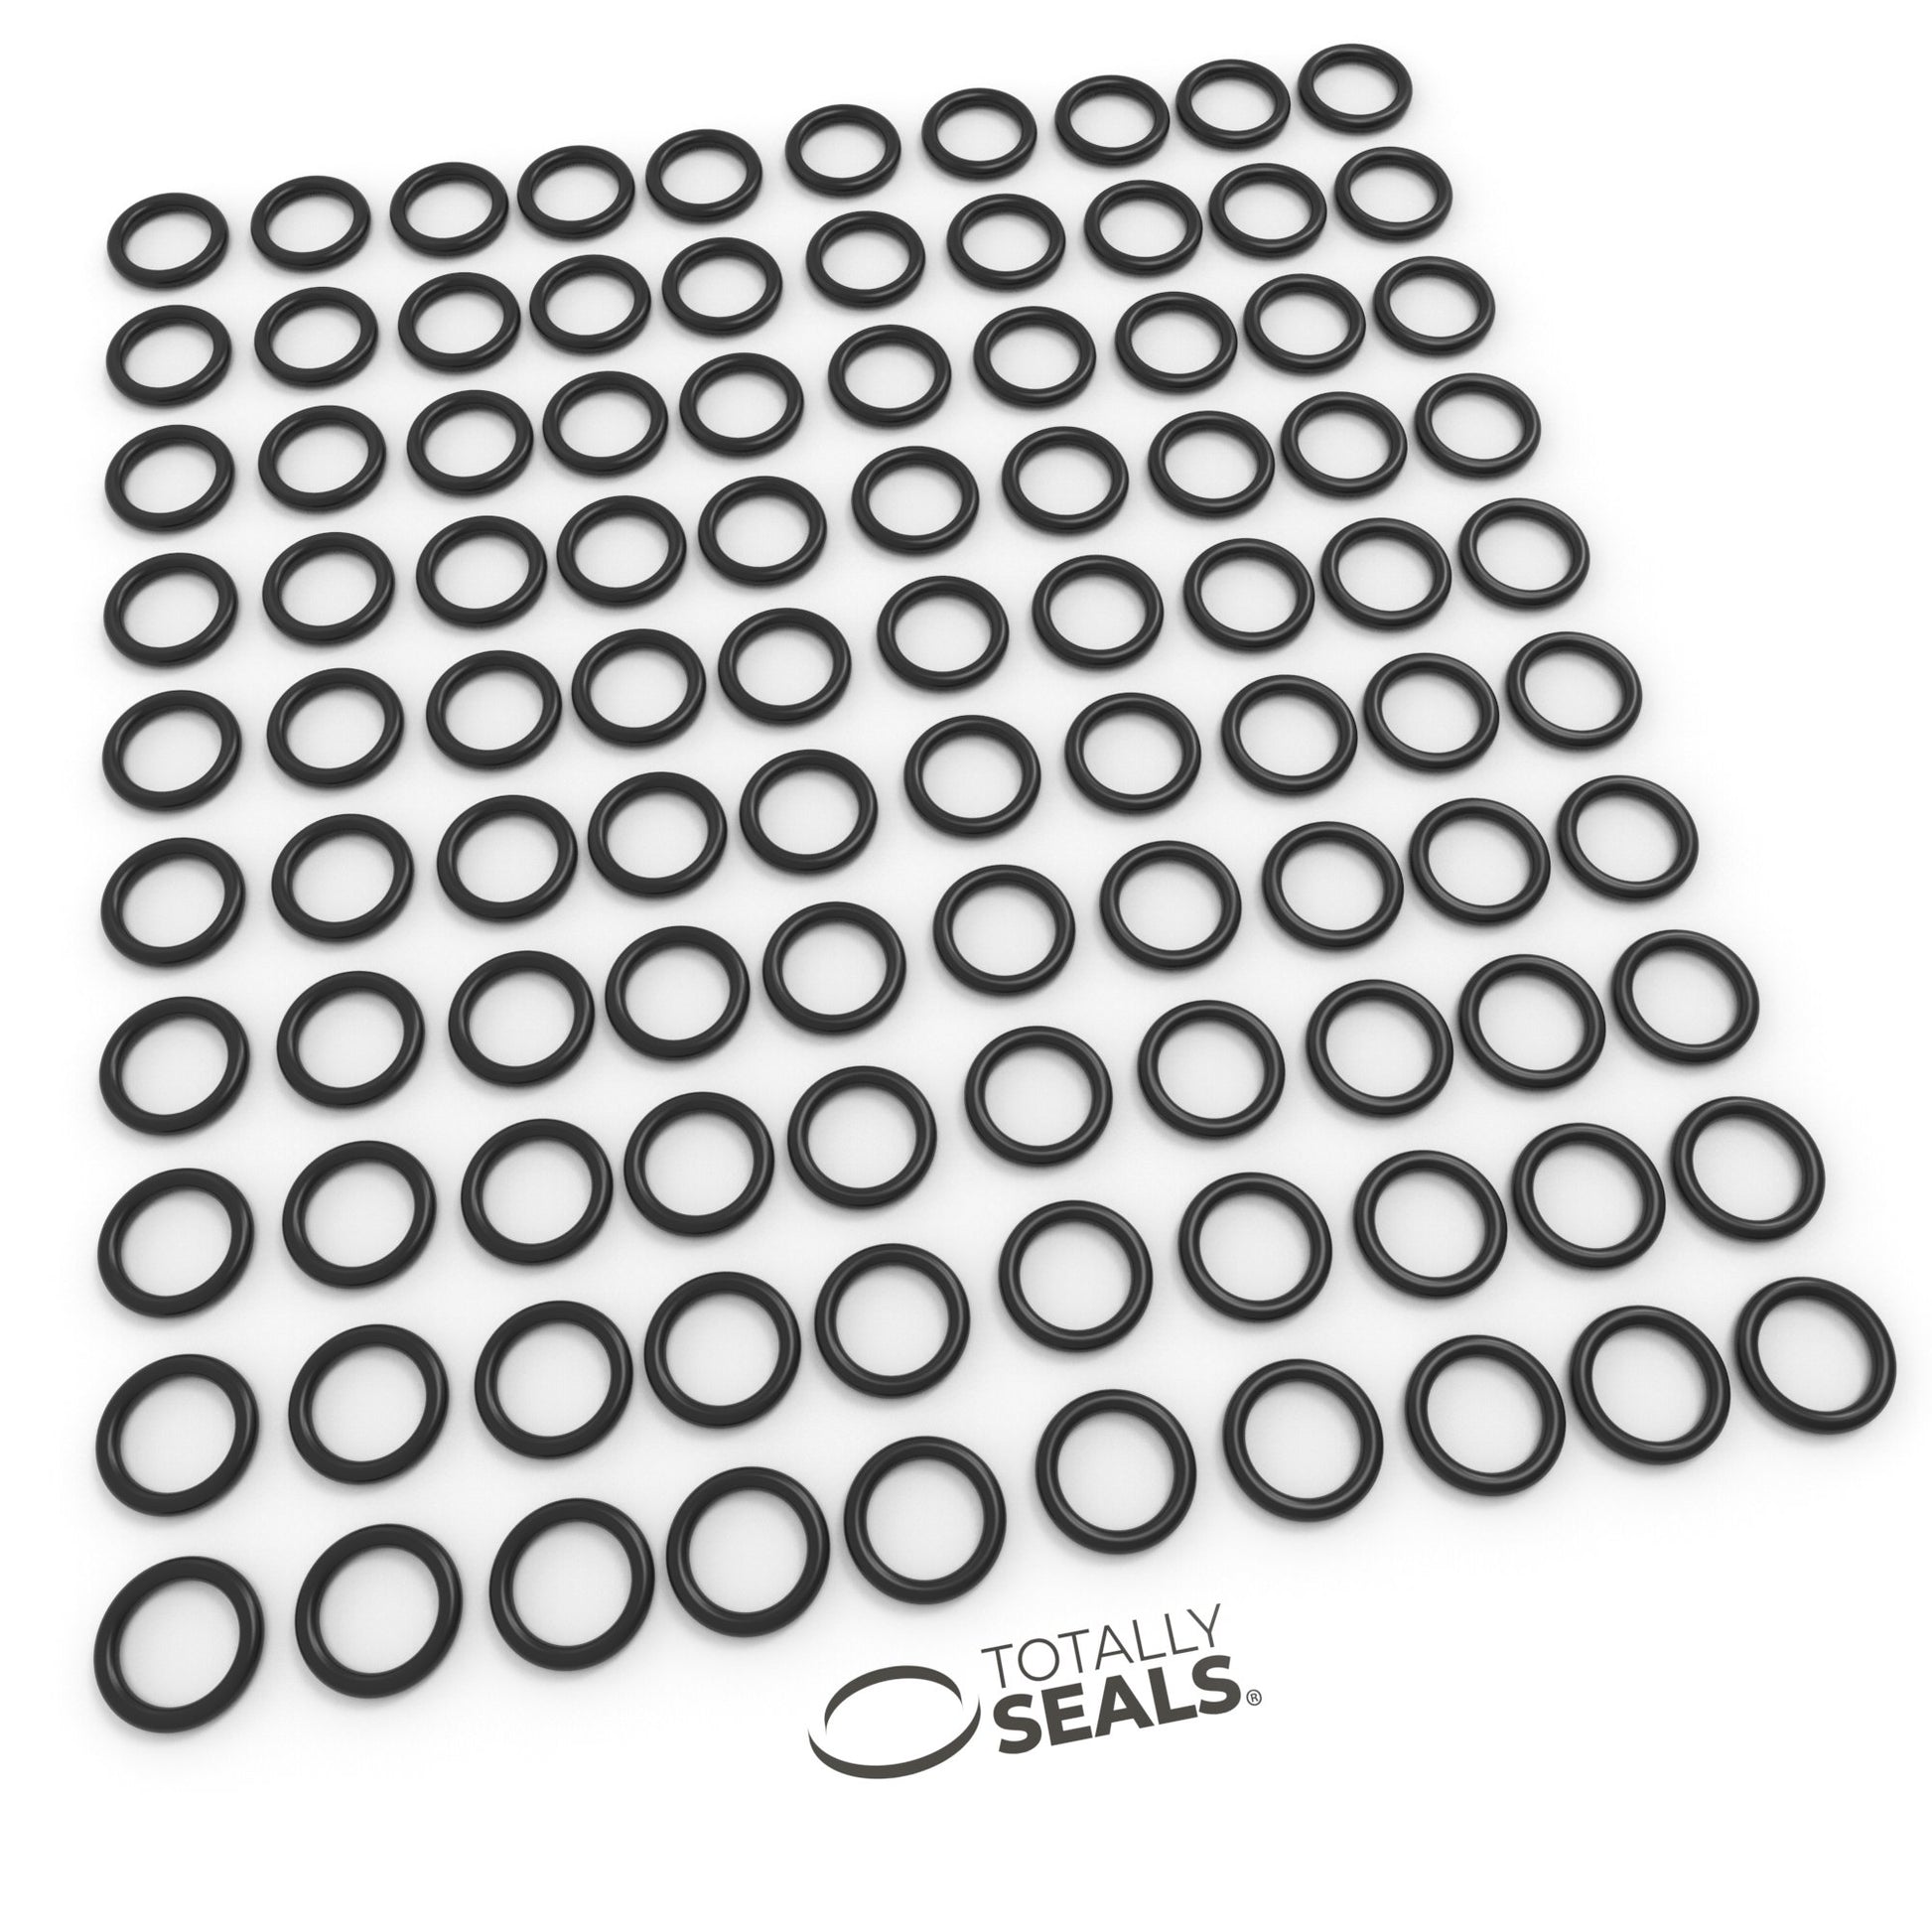 5/32" x 1/16" (BS007) Imperial Nitrile O-Rings - Totally Seals®